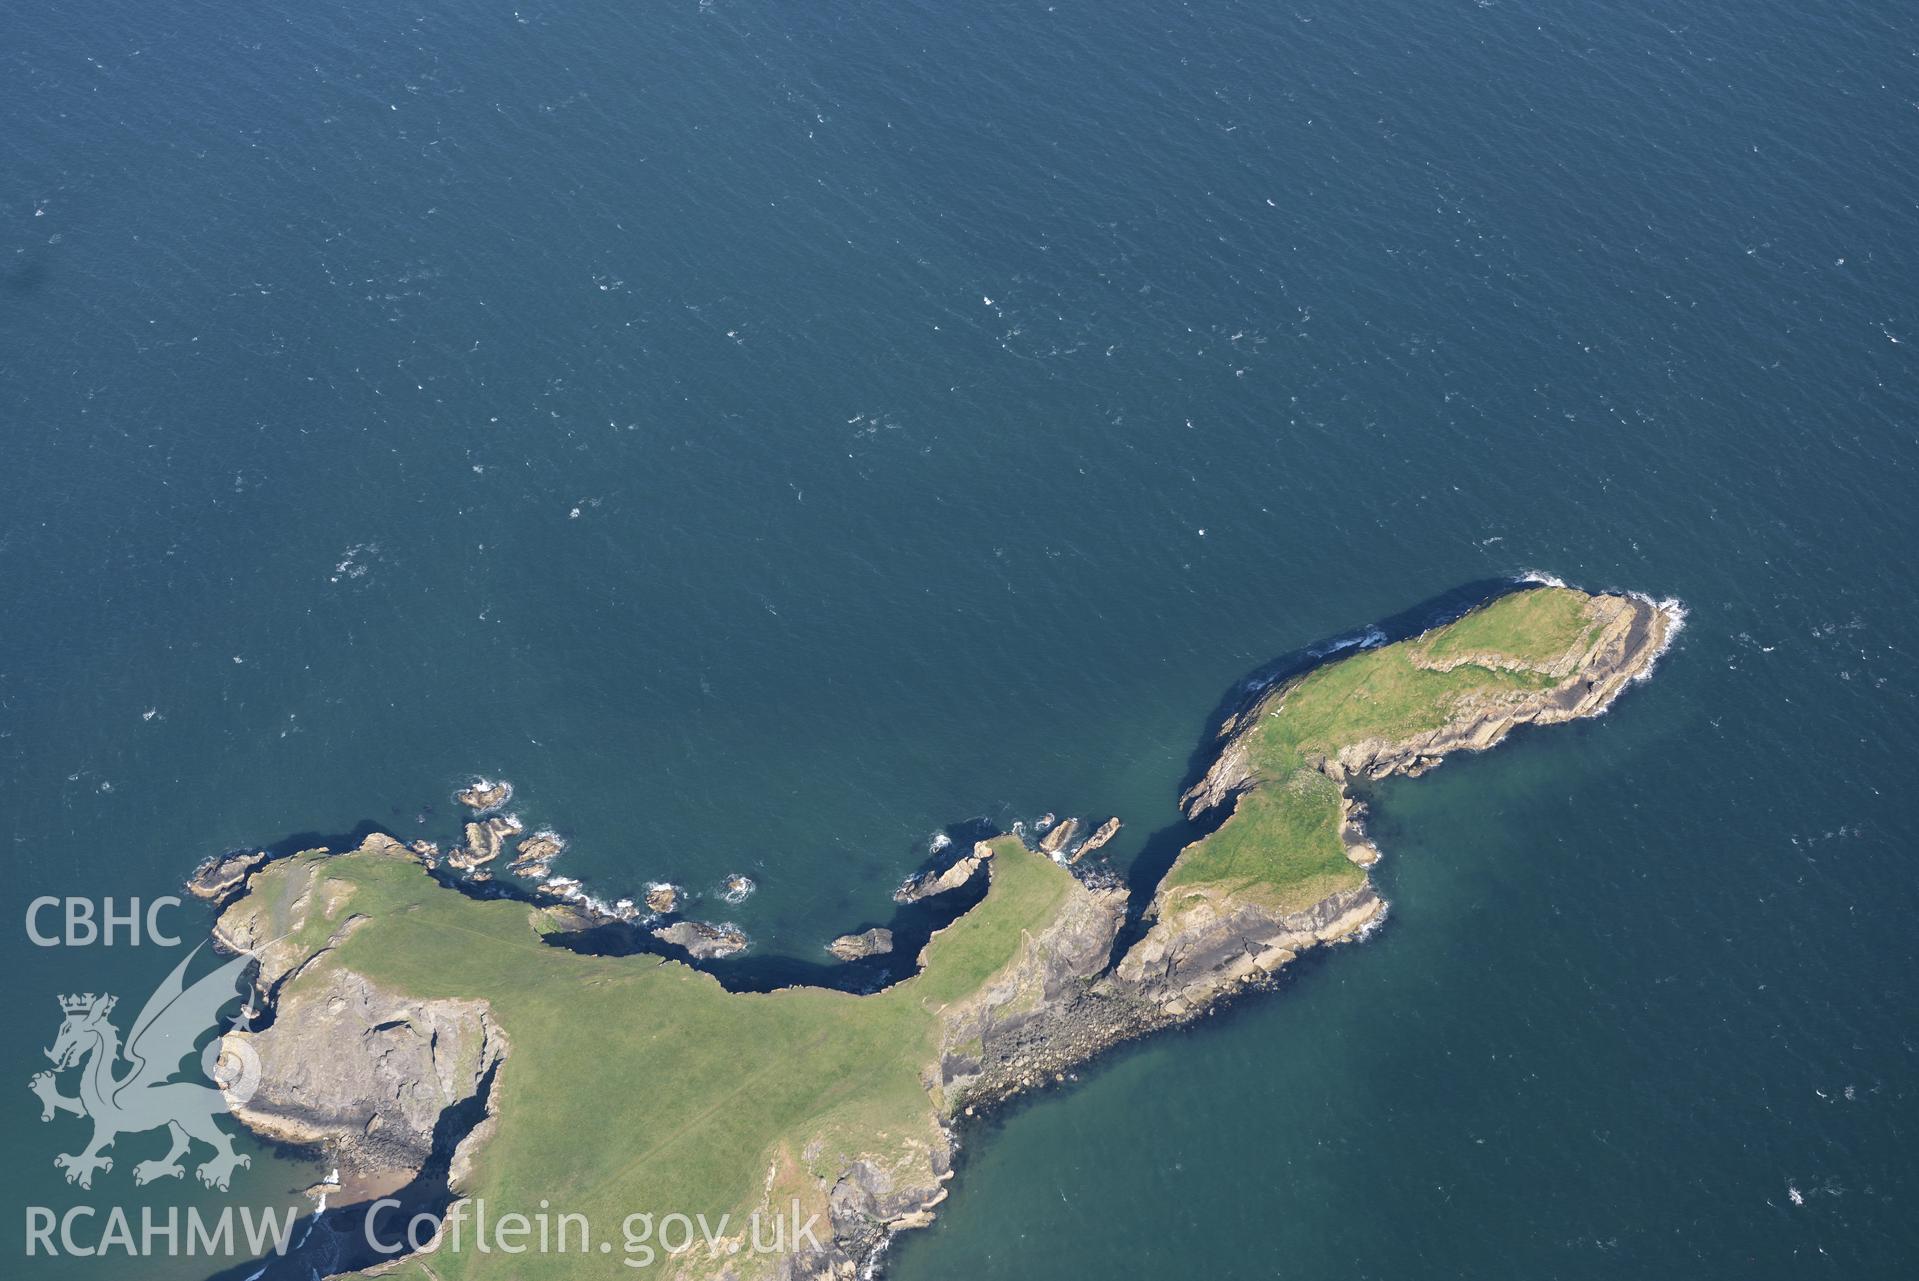 Aerial photography of Ynys Lochtyn taken on 3rd May 2017.  Baseline aerial reconnaissance survey for the CHERISH Project. ? Crown: CHERISH PROJECT 2017. Produced with EU funds through the Ireland Wales Co-operation Programme 2014-2020. All material made freely available through the Open Government Licence.